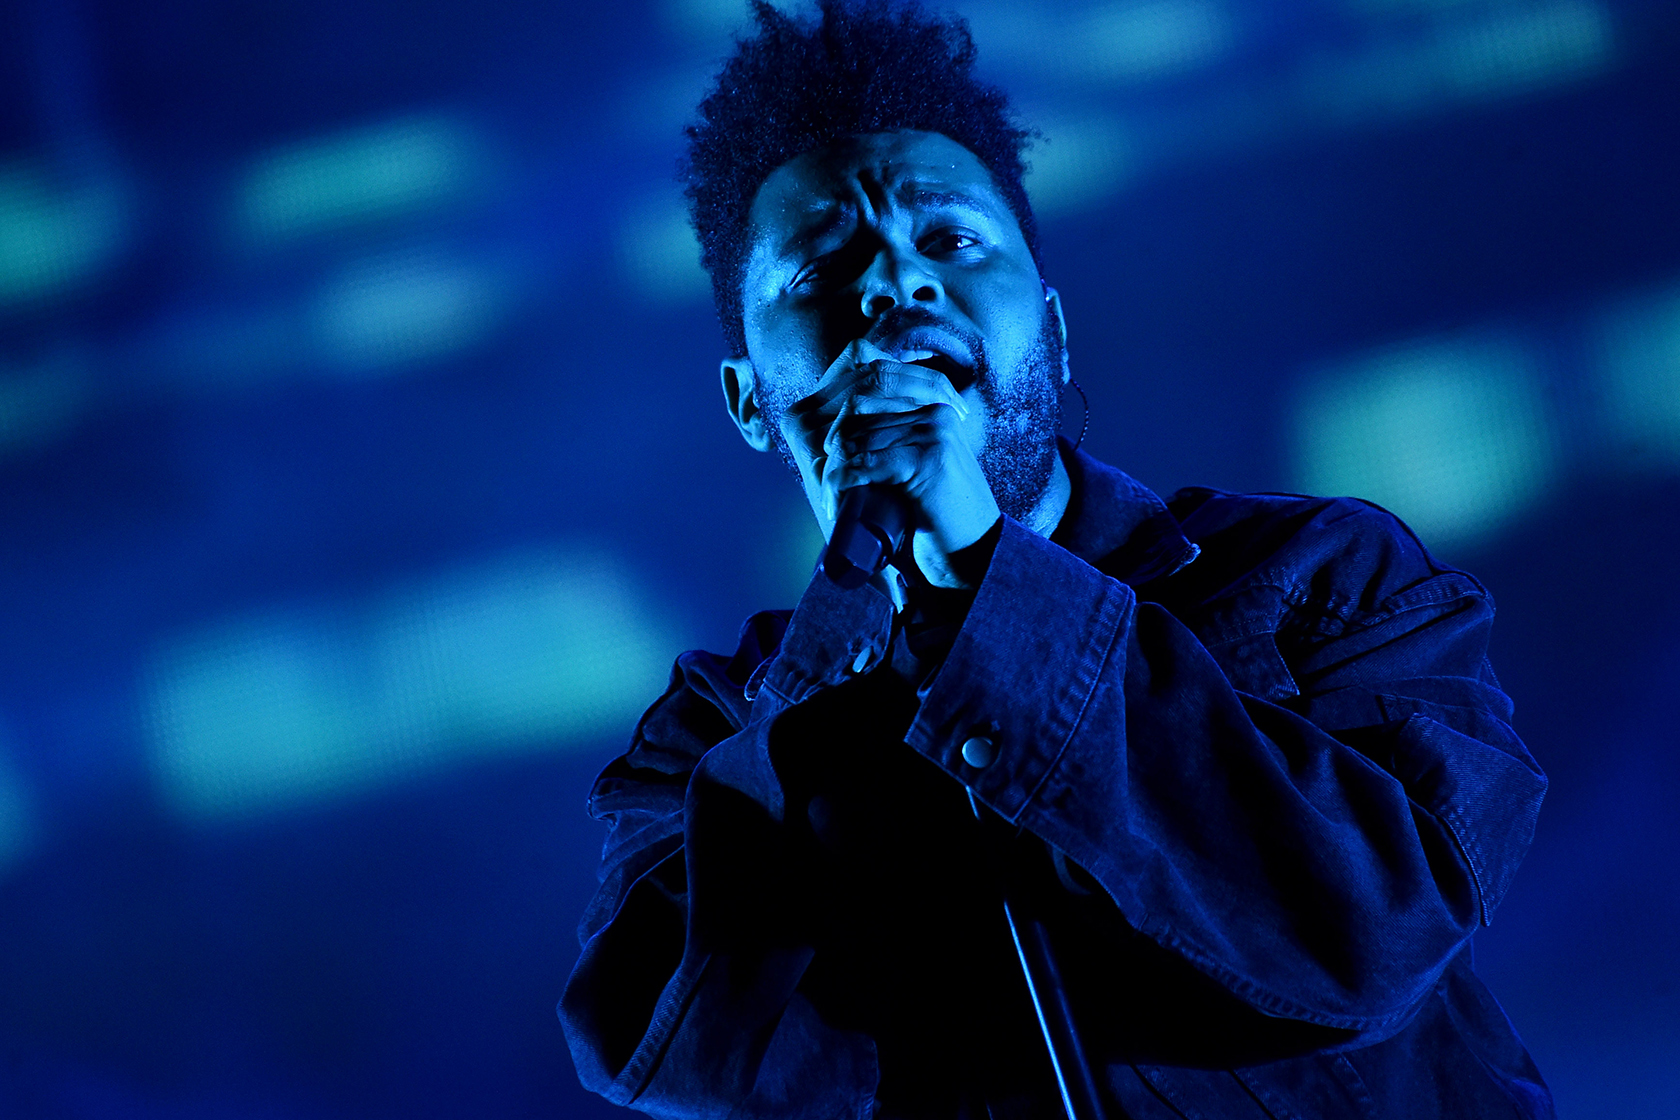 The Weeknd is coming to Seattle in August as part of the “After Hours